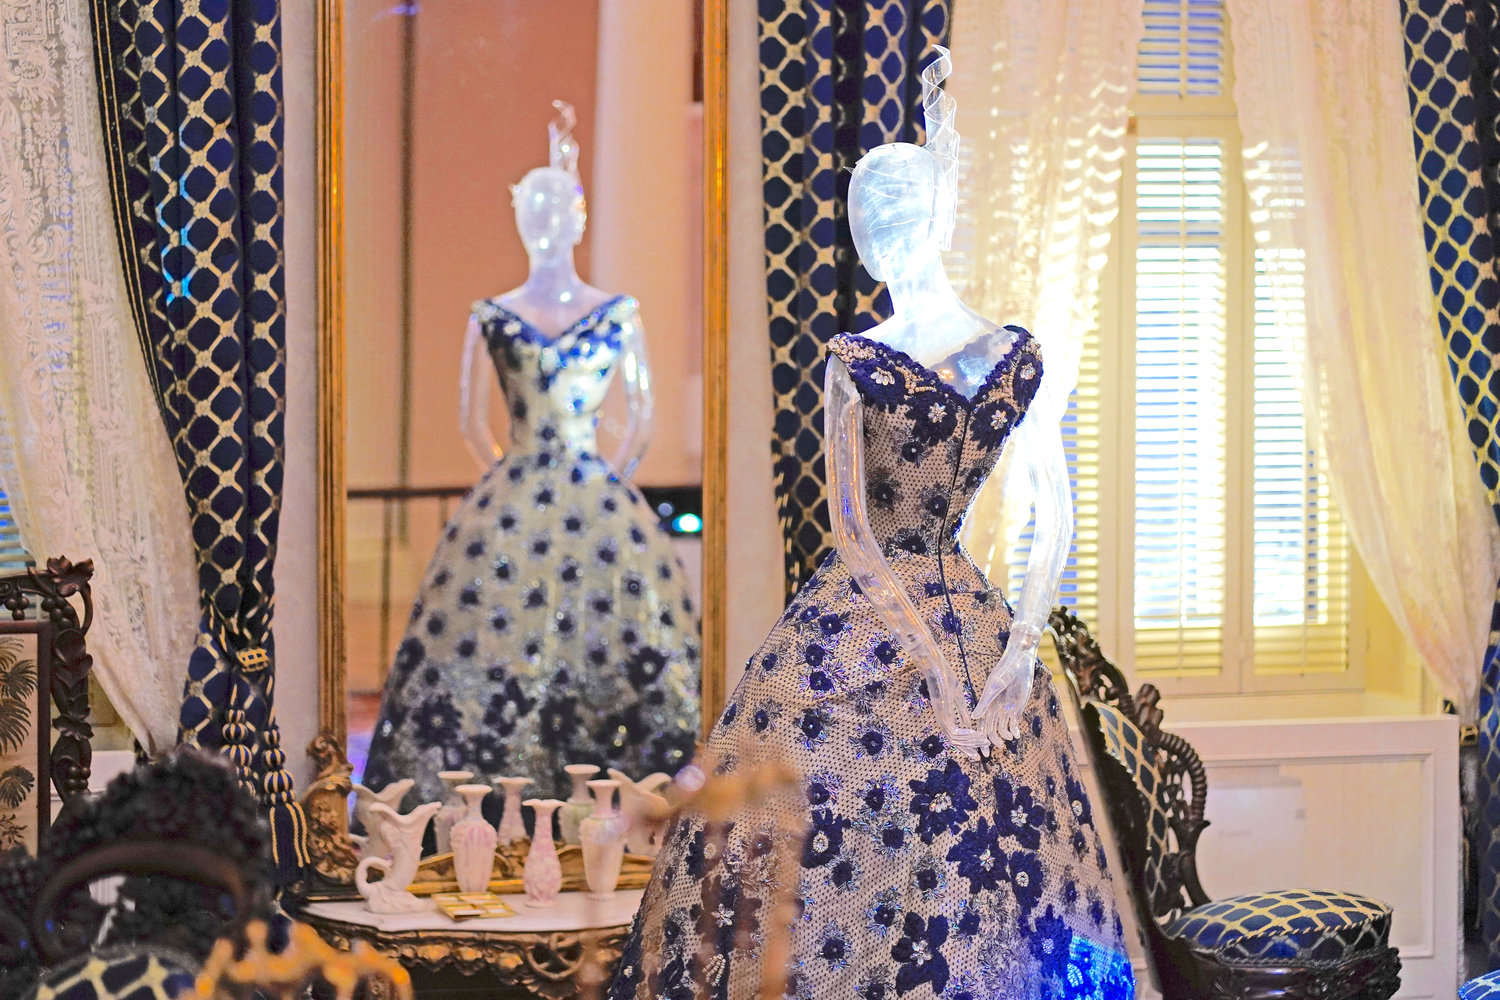 A scene staged by film director Janicza Bravo featuring fashions by designer Marguery Bolhagen is displayed as part of the Met Museum Costume Institute’s exhibit.